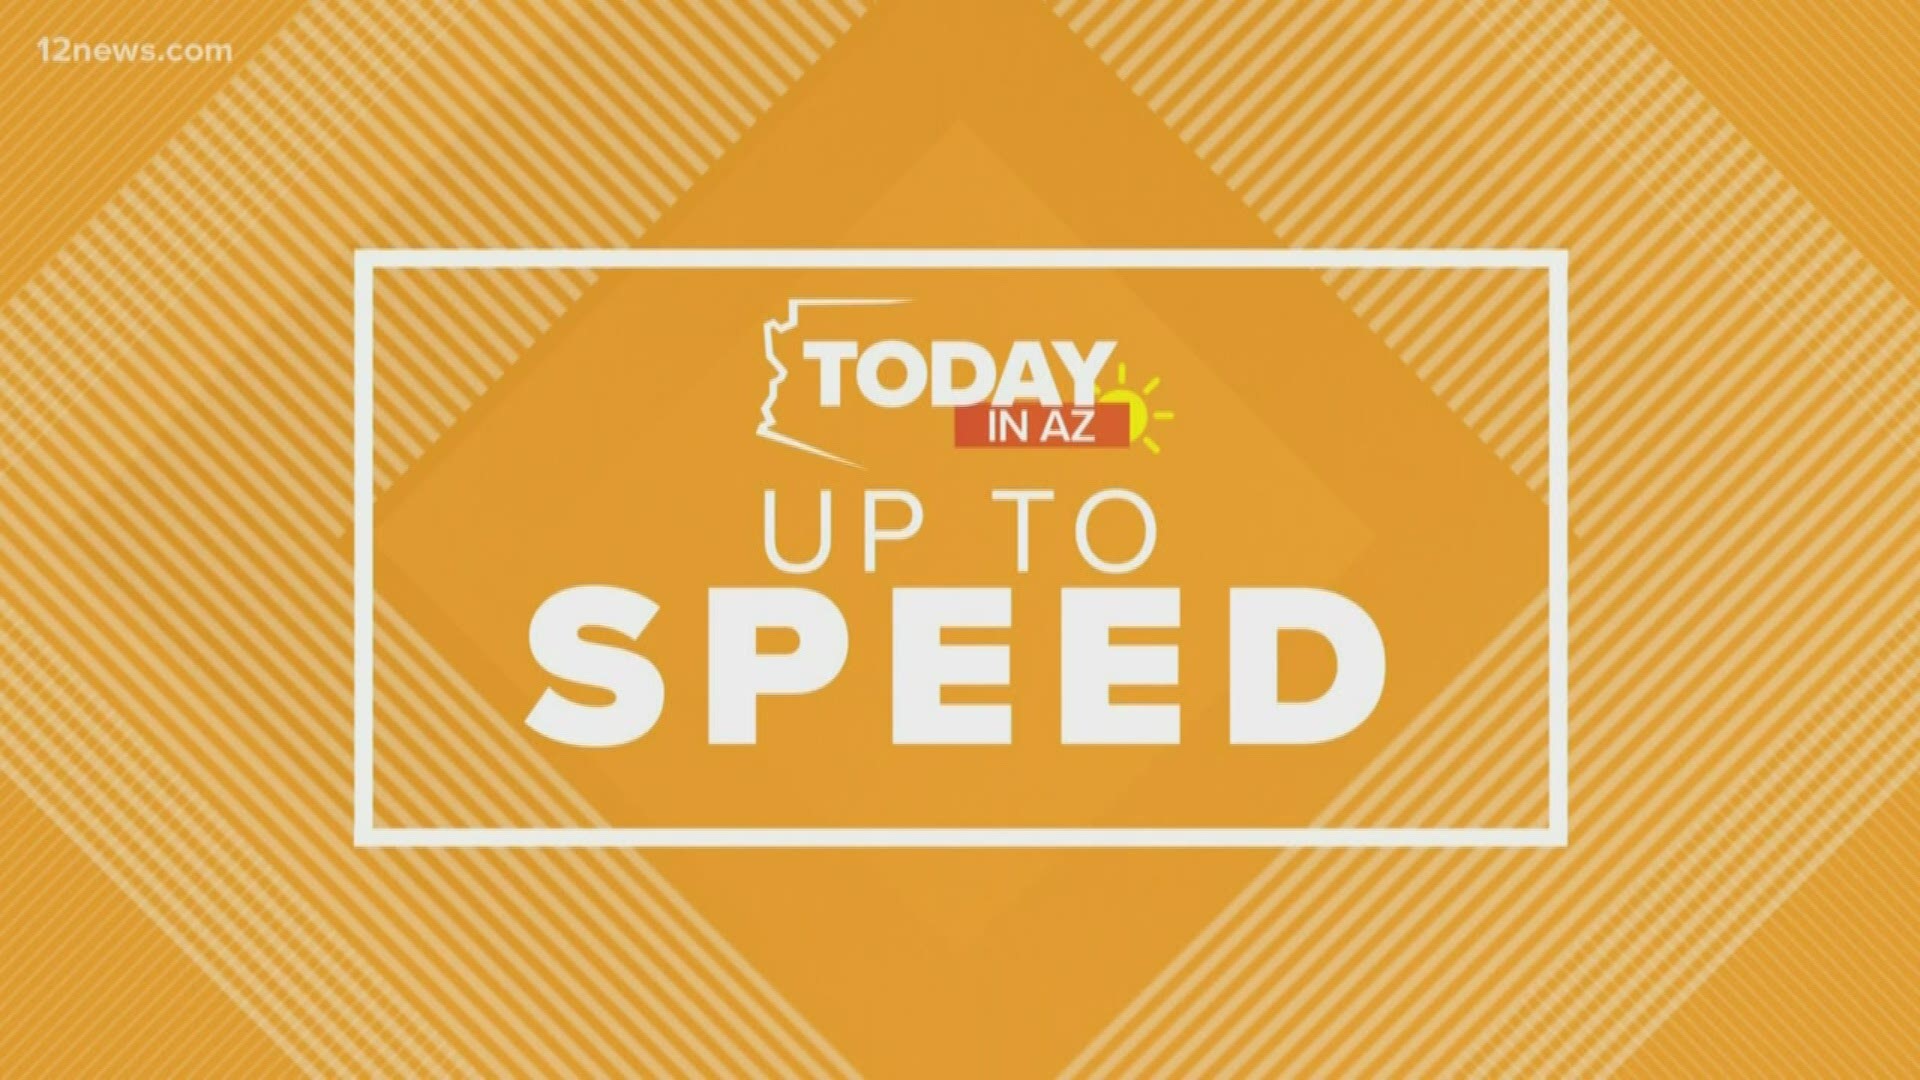 Get 'Up to Speed' on Wednesday morning.